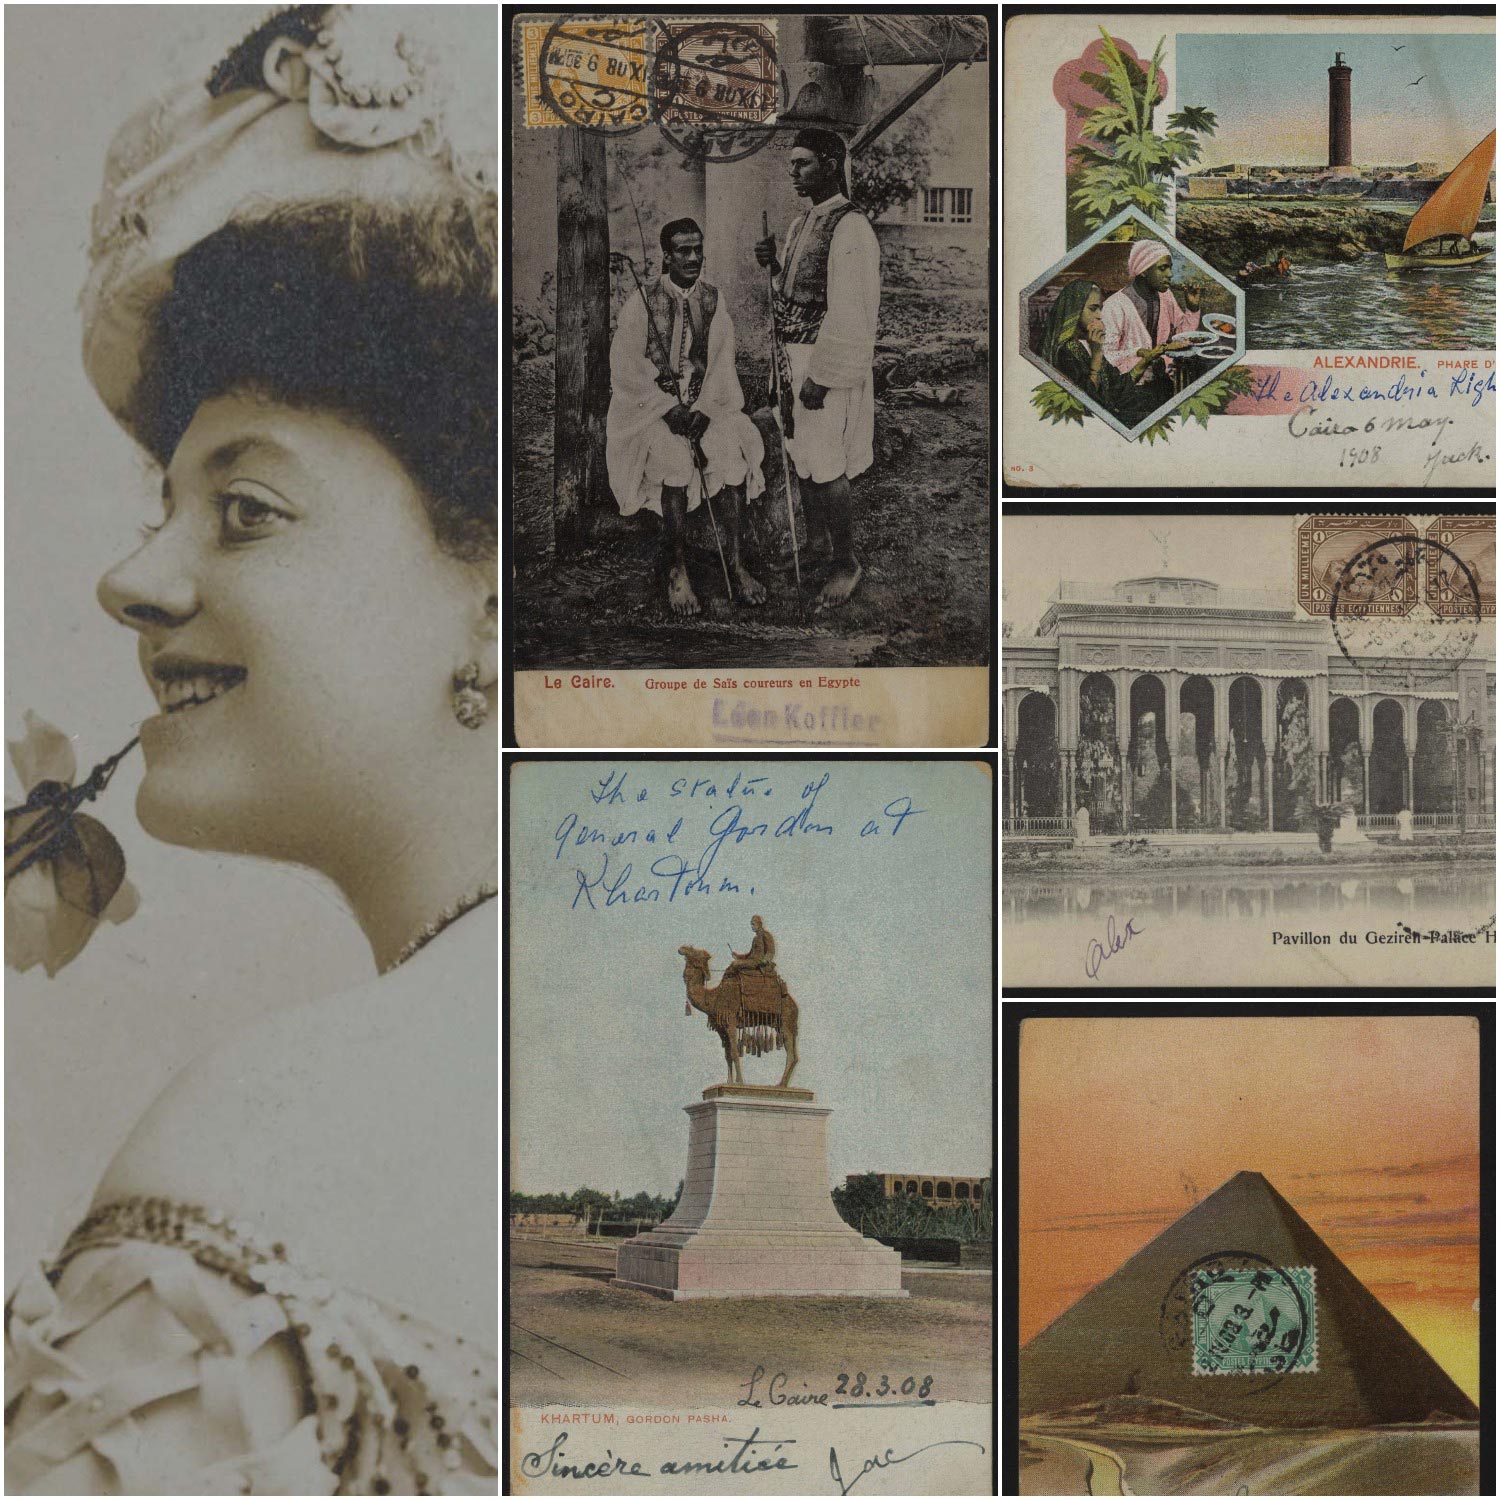 Miss Kitty Lord and Her Egyptian Tours: A Burlesque Artist in Cairo, 1908-1912